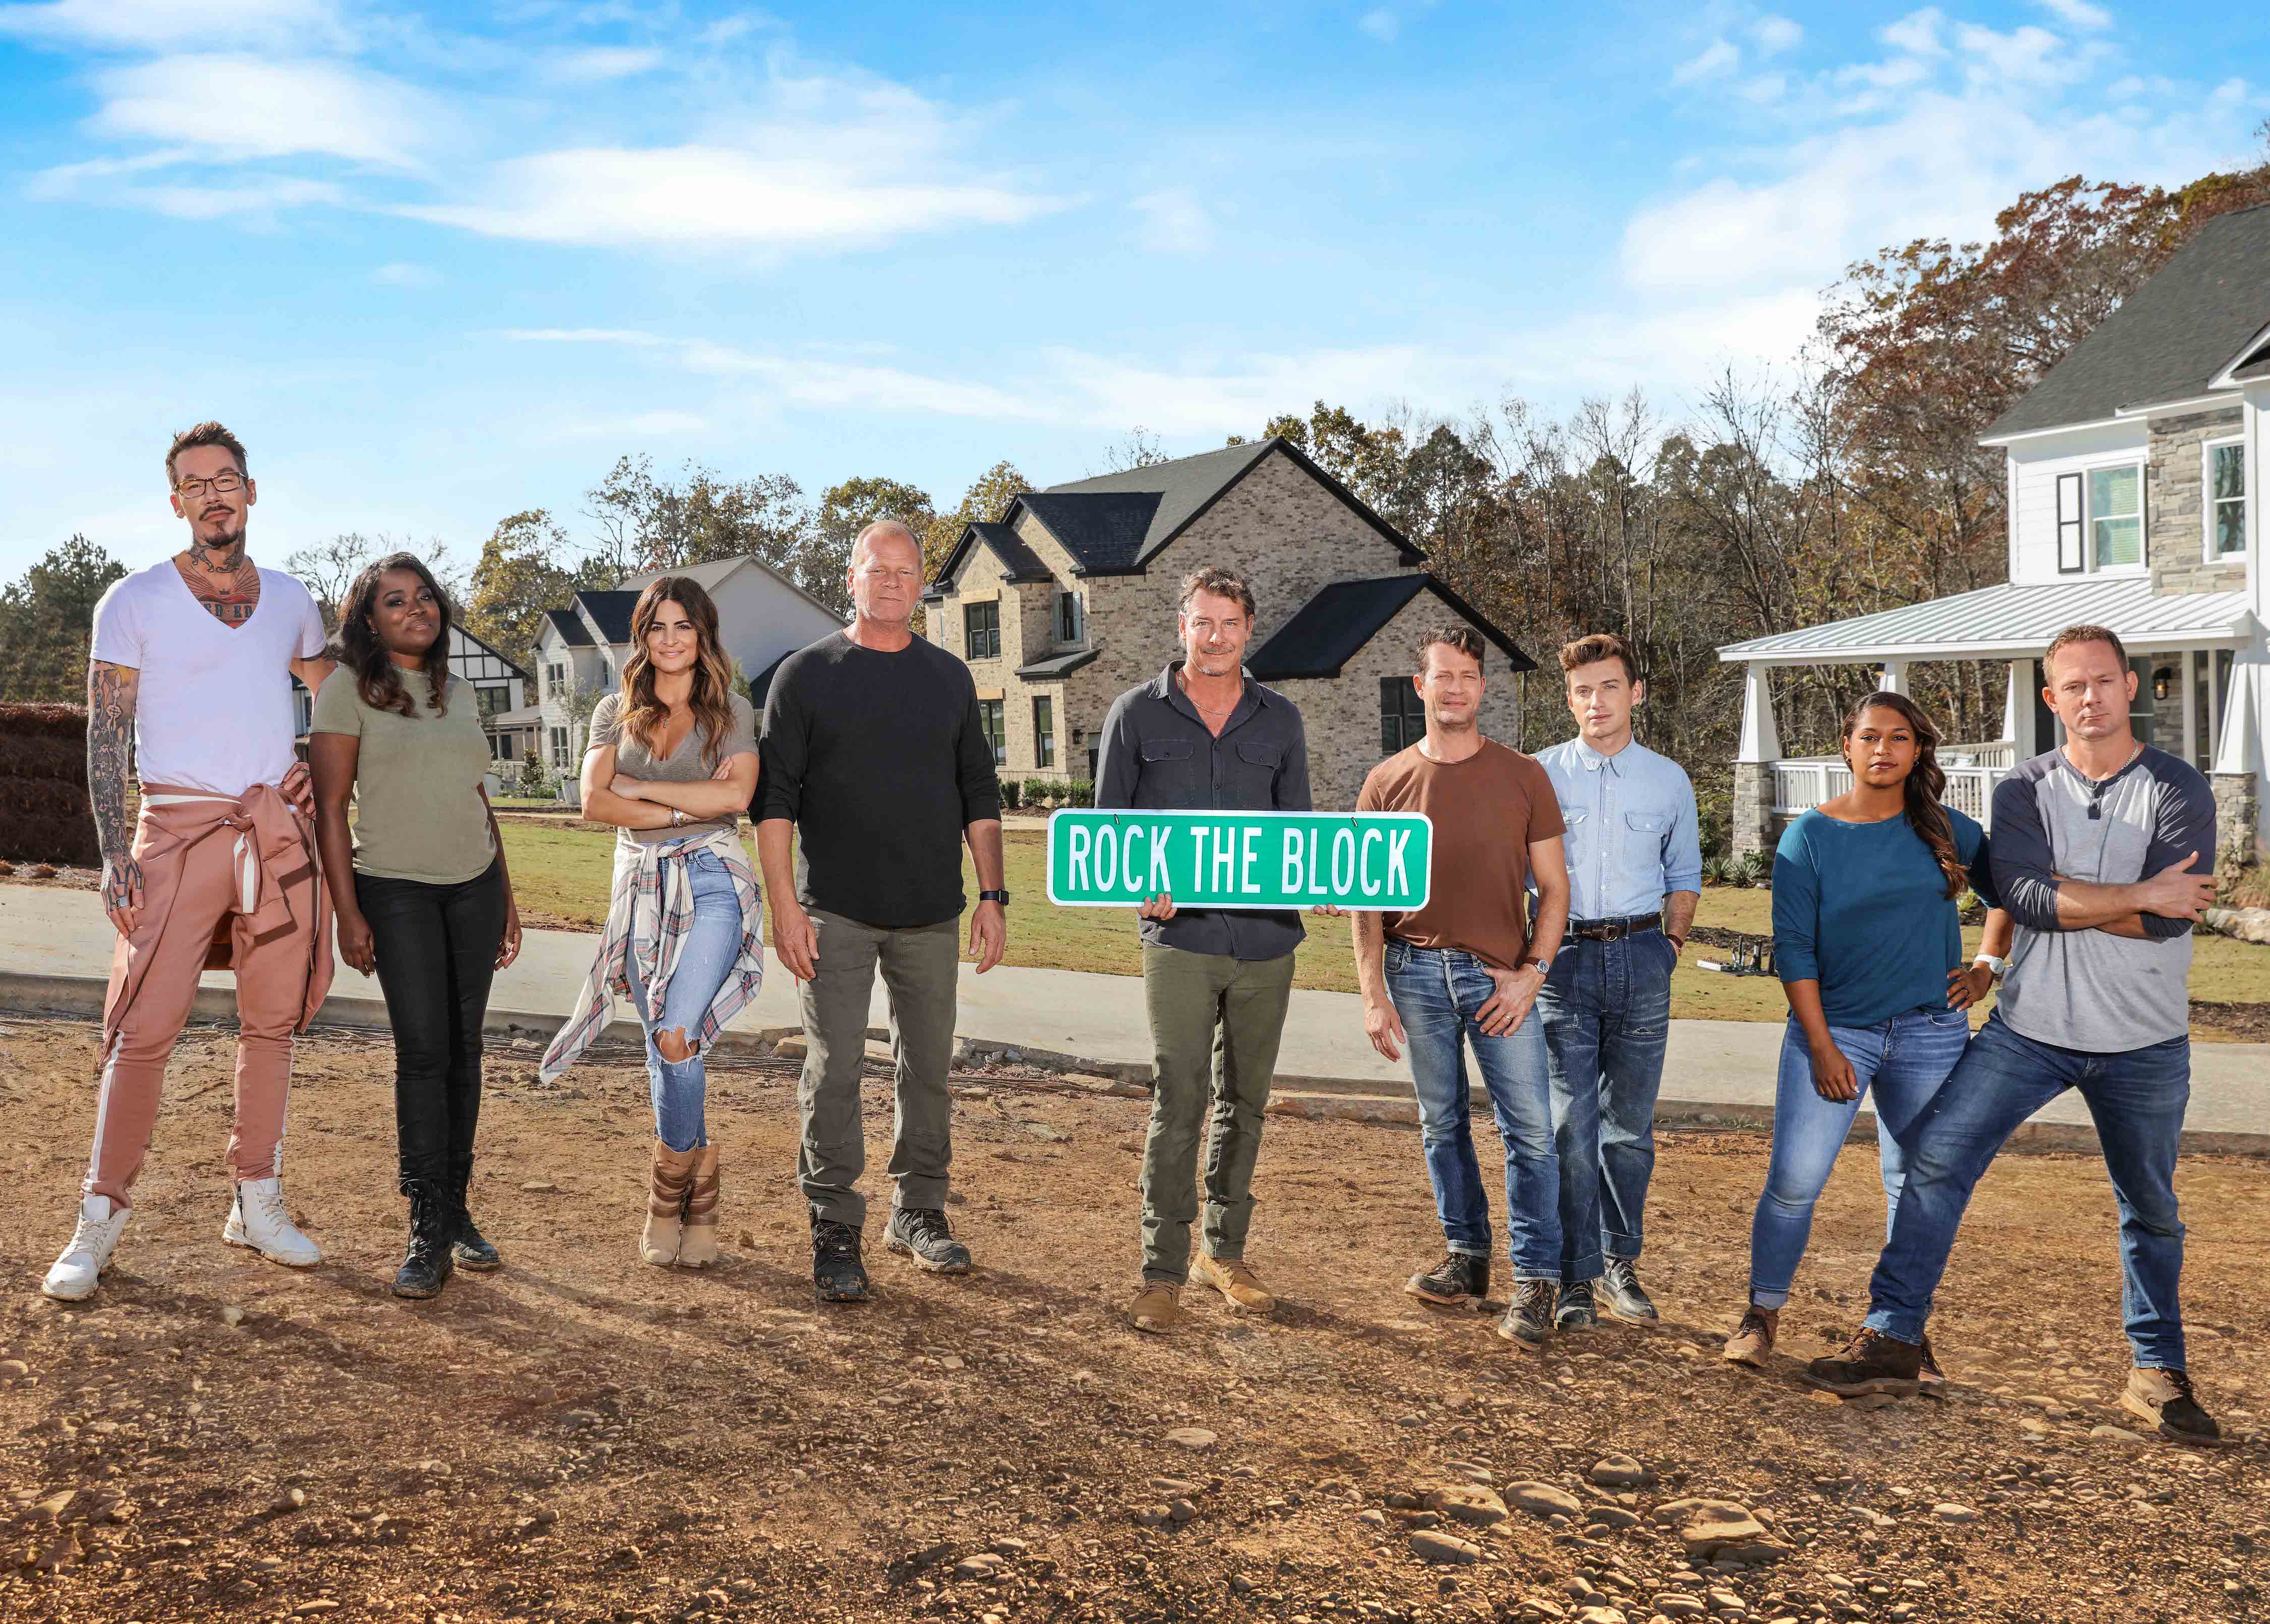 As seen on HGTV’s Rock the Block season 2, the cast and host Ty Pennington poses with the houses in the background.